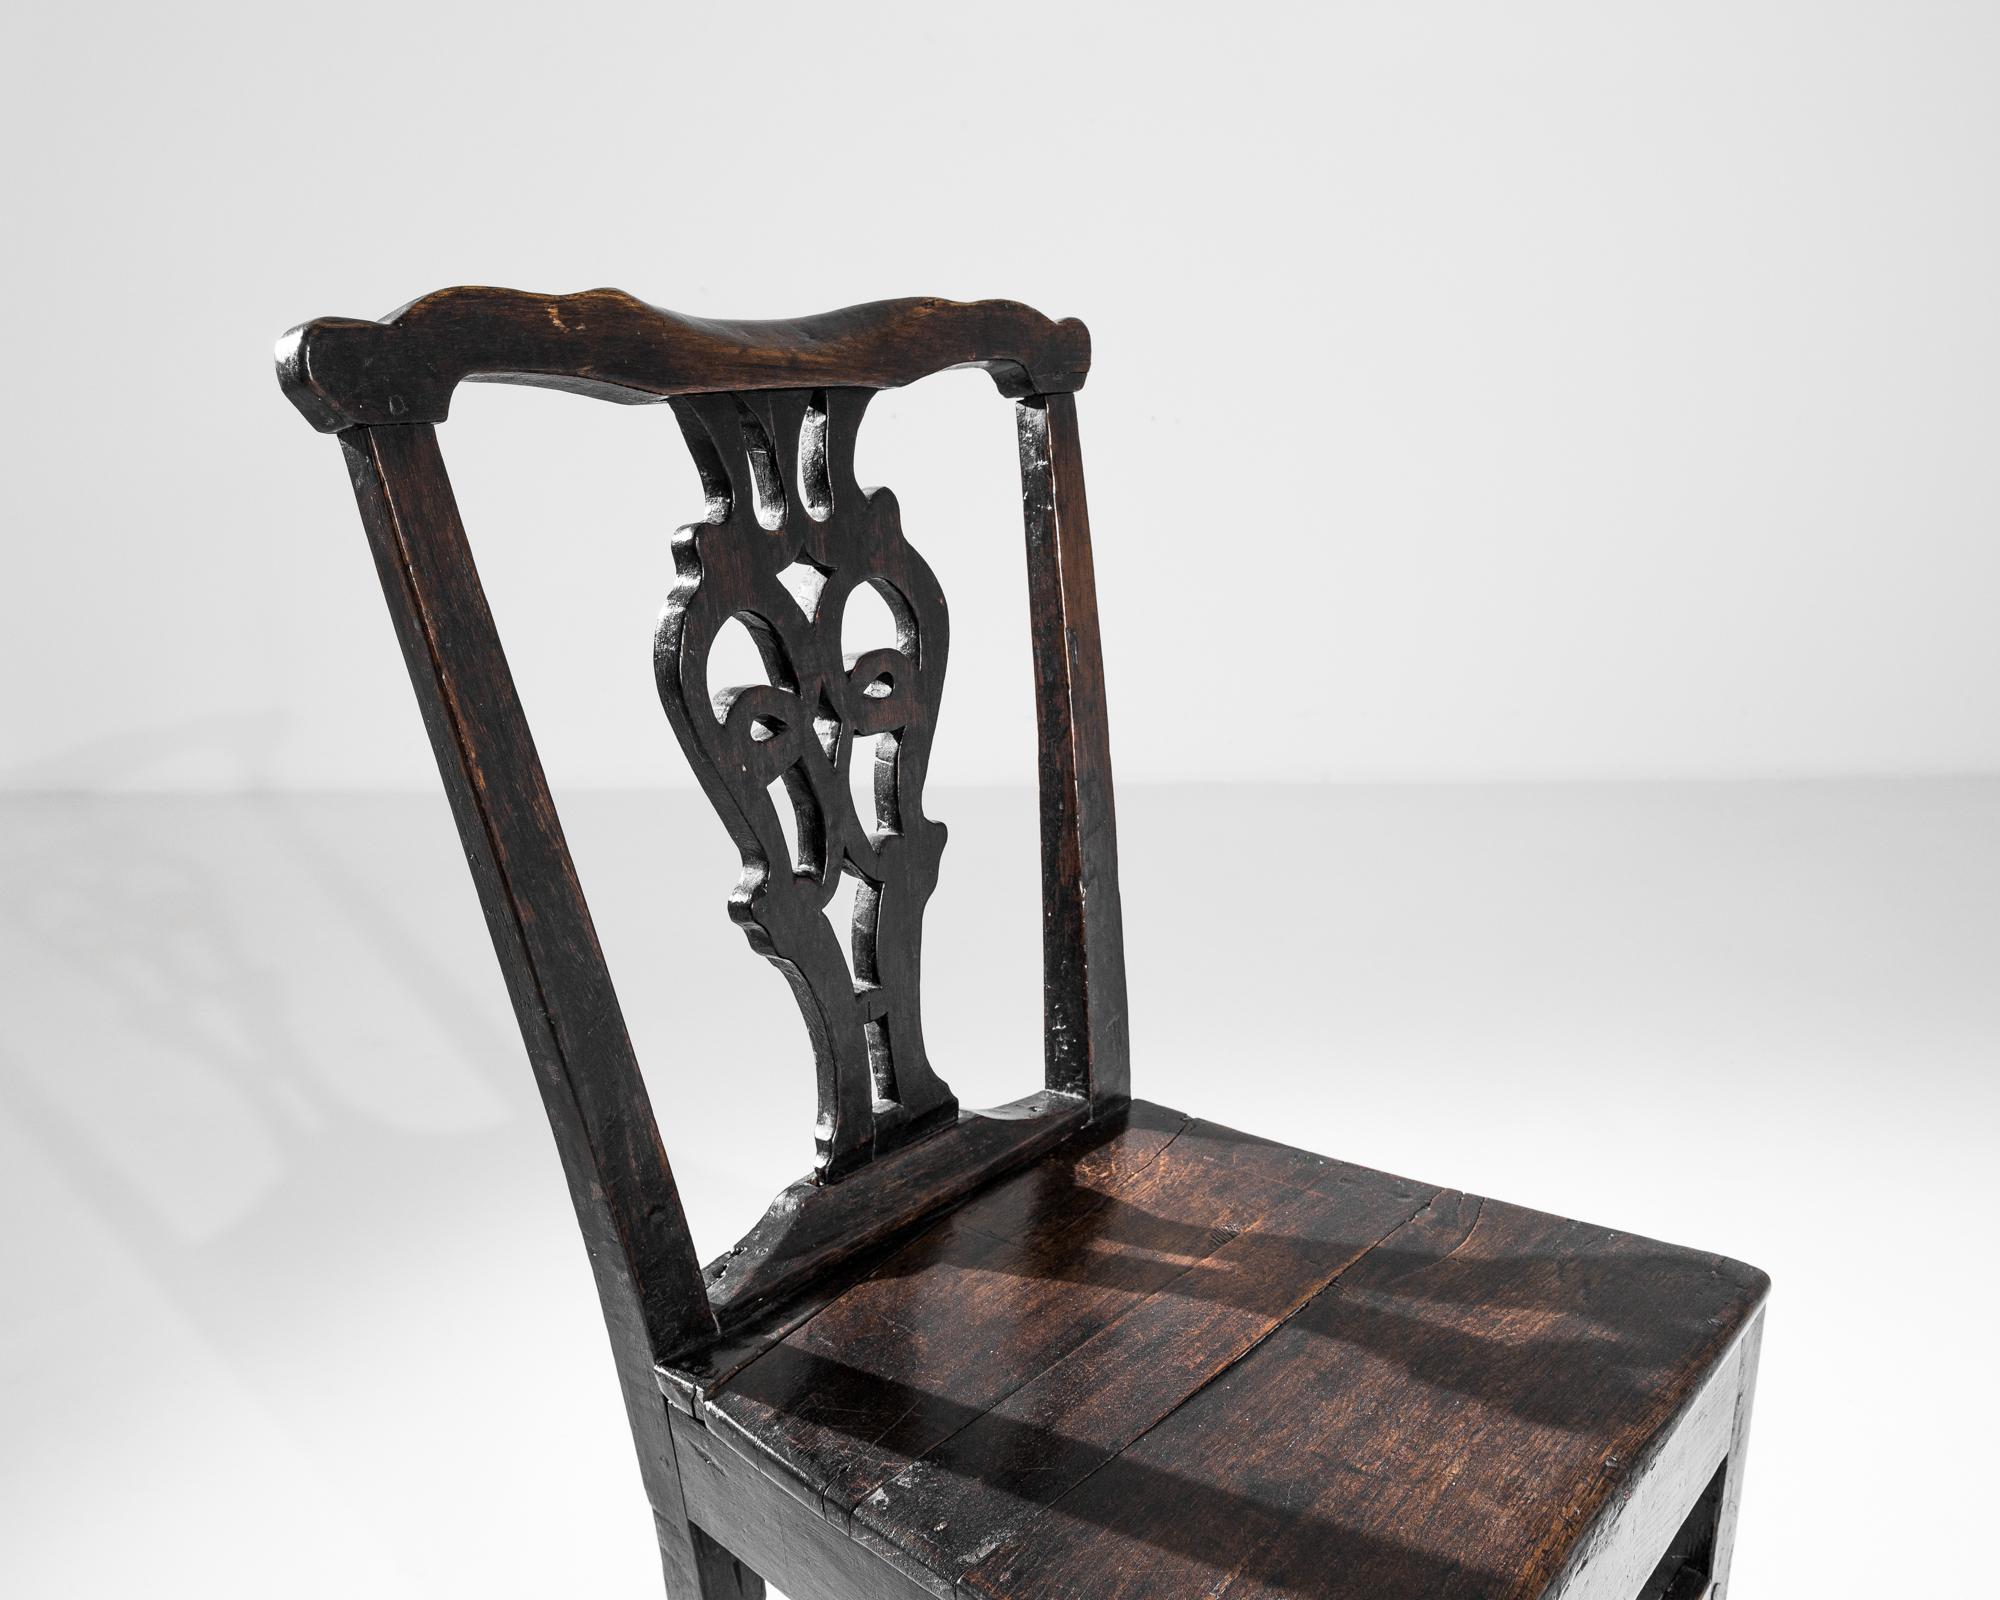 An ornate back splat and expressive patina give this oak chair a poetic character. Made in the UK circa 1800, the wood has retained its original finish: a deep ebony hue, brindled with amber inflections. The right-angled, upright seat finds an